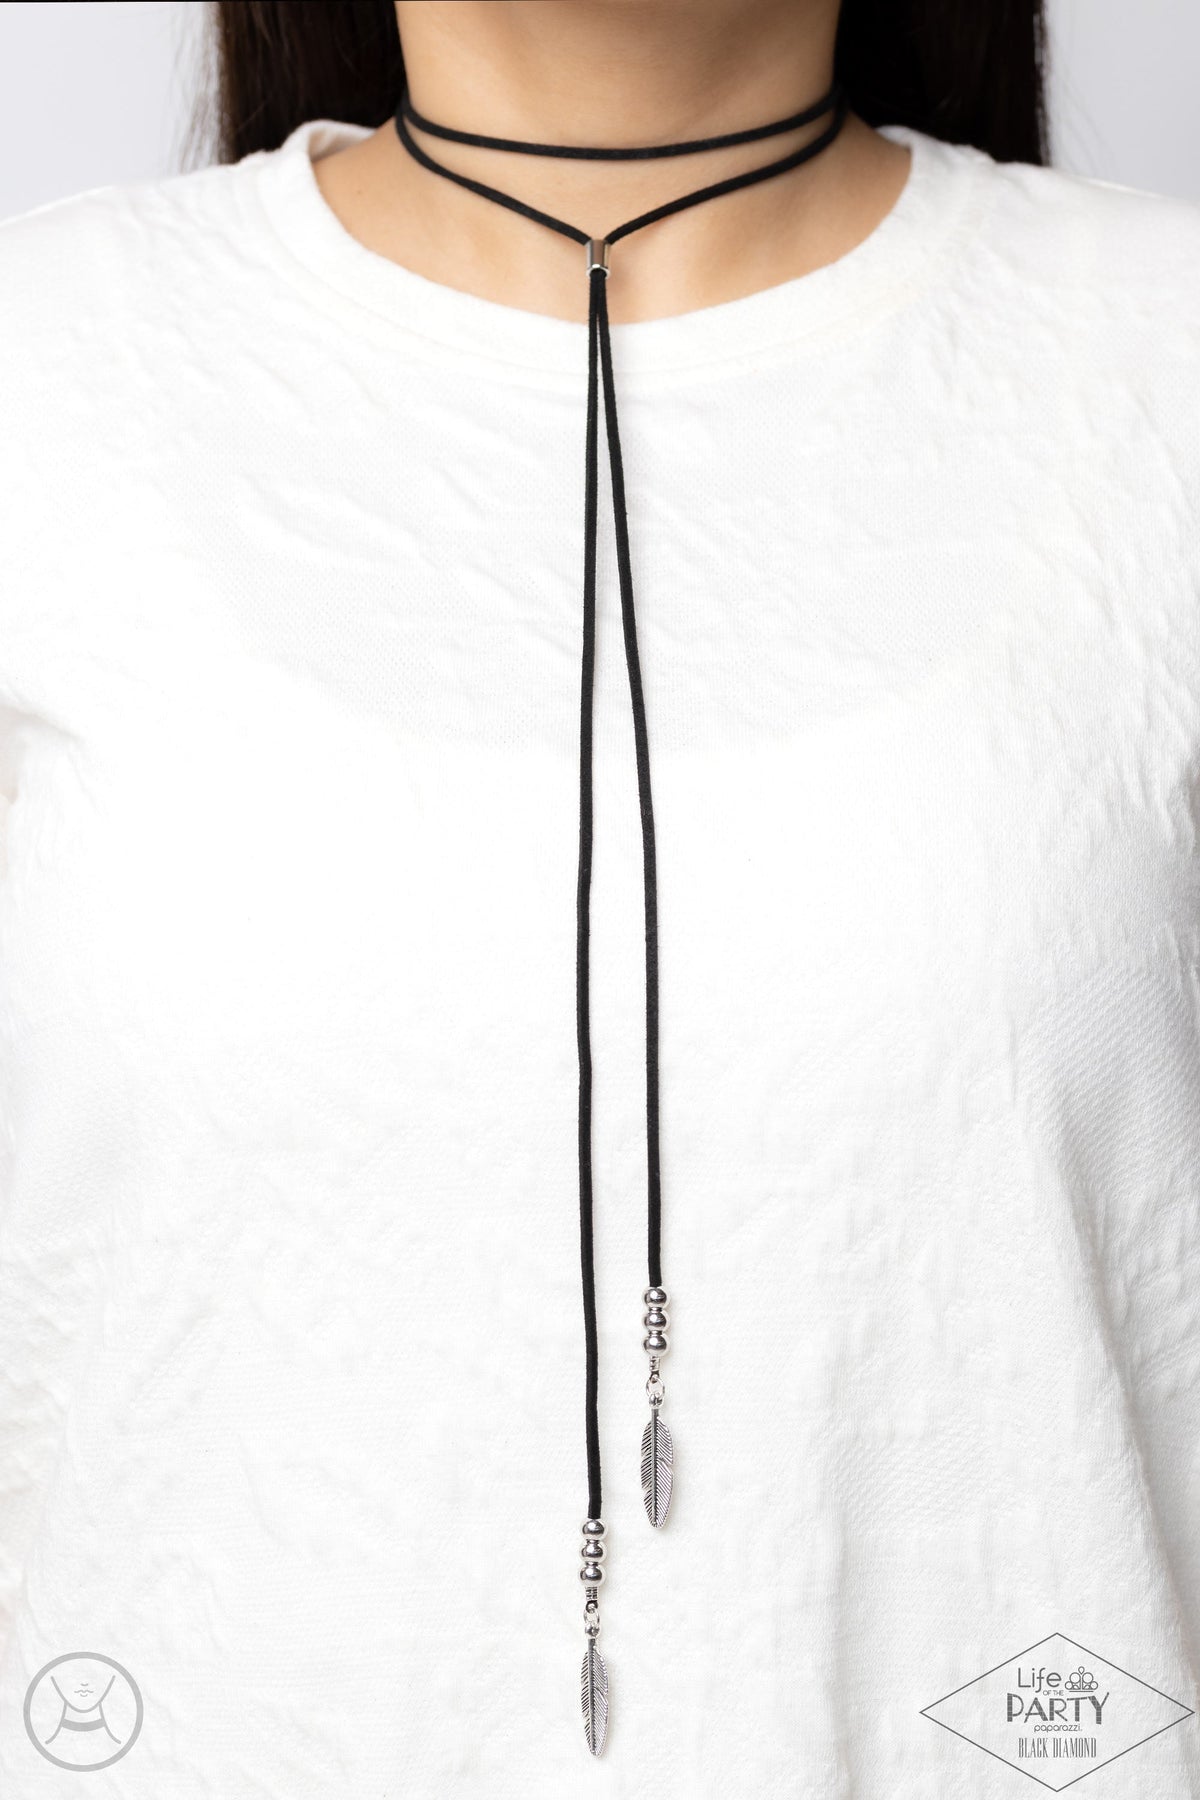 Lost On The Wind Black Suede Choker Necklace - Paparazzi Accessories-on model - CarasShop.com - $5 Jewelry by Cara Jewels